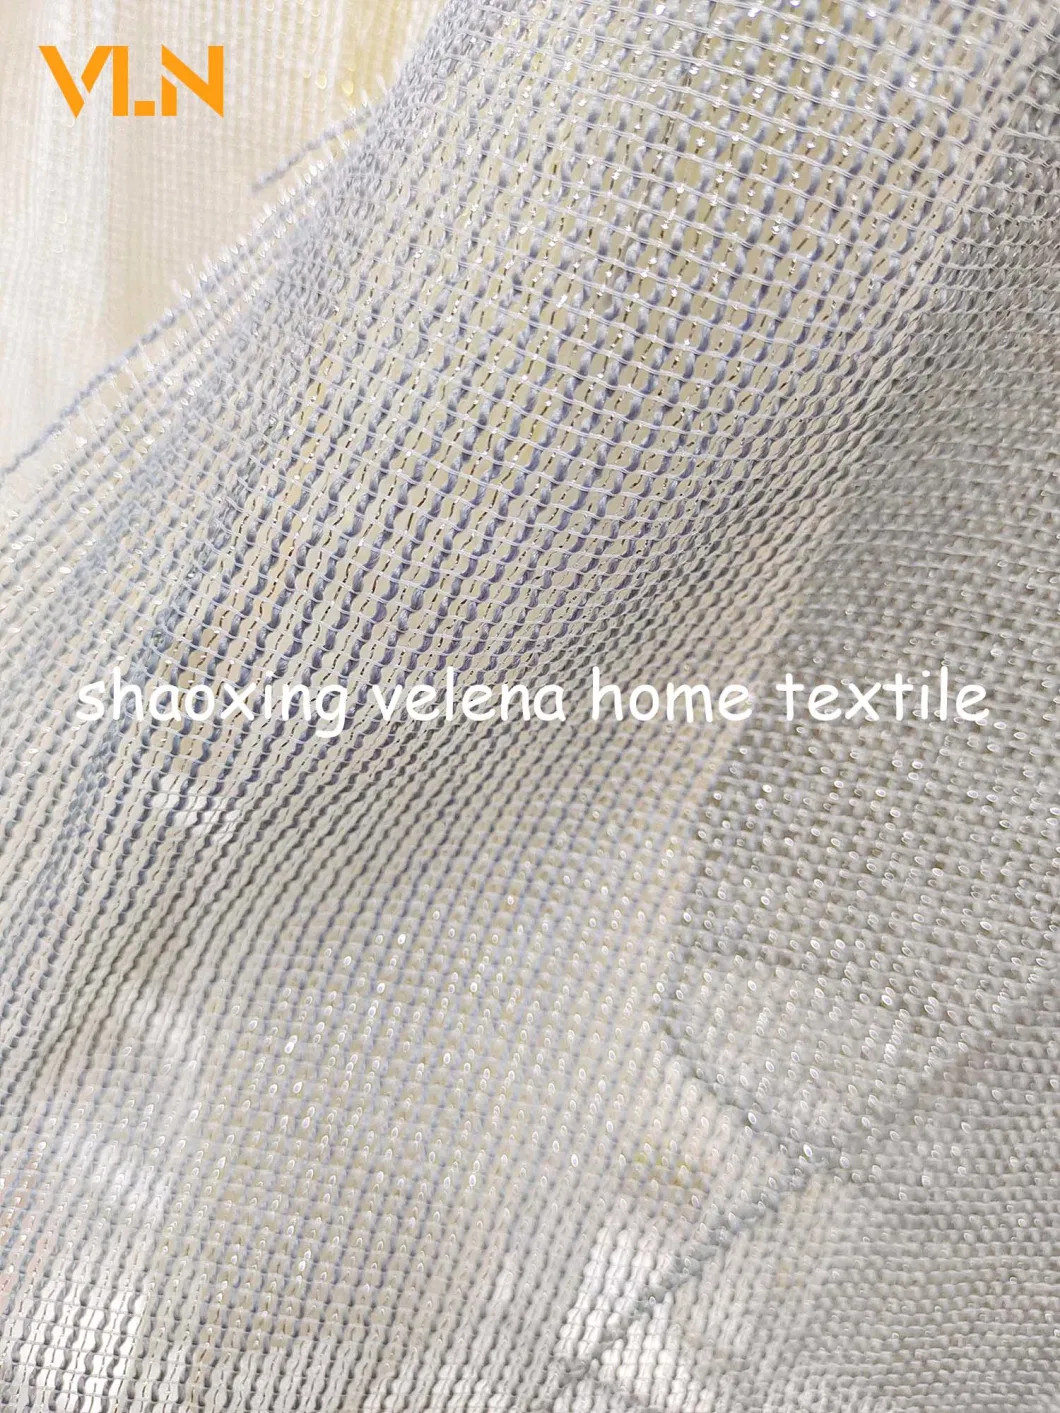 100%Polyester Linen with Lurex curtain Sheer Fabric Ready Goods Upholstery Fabric for Livin Room Window Curtain